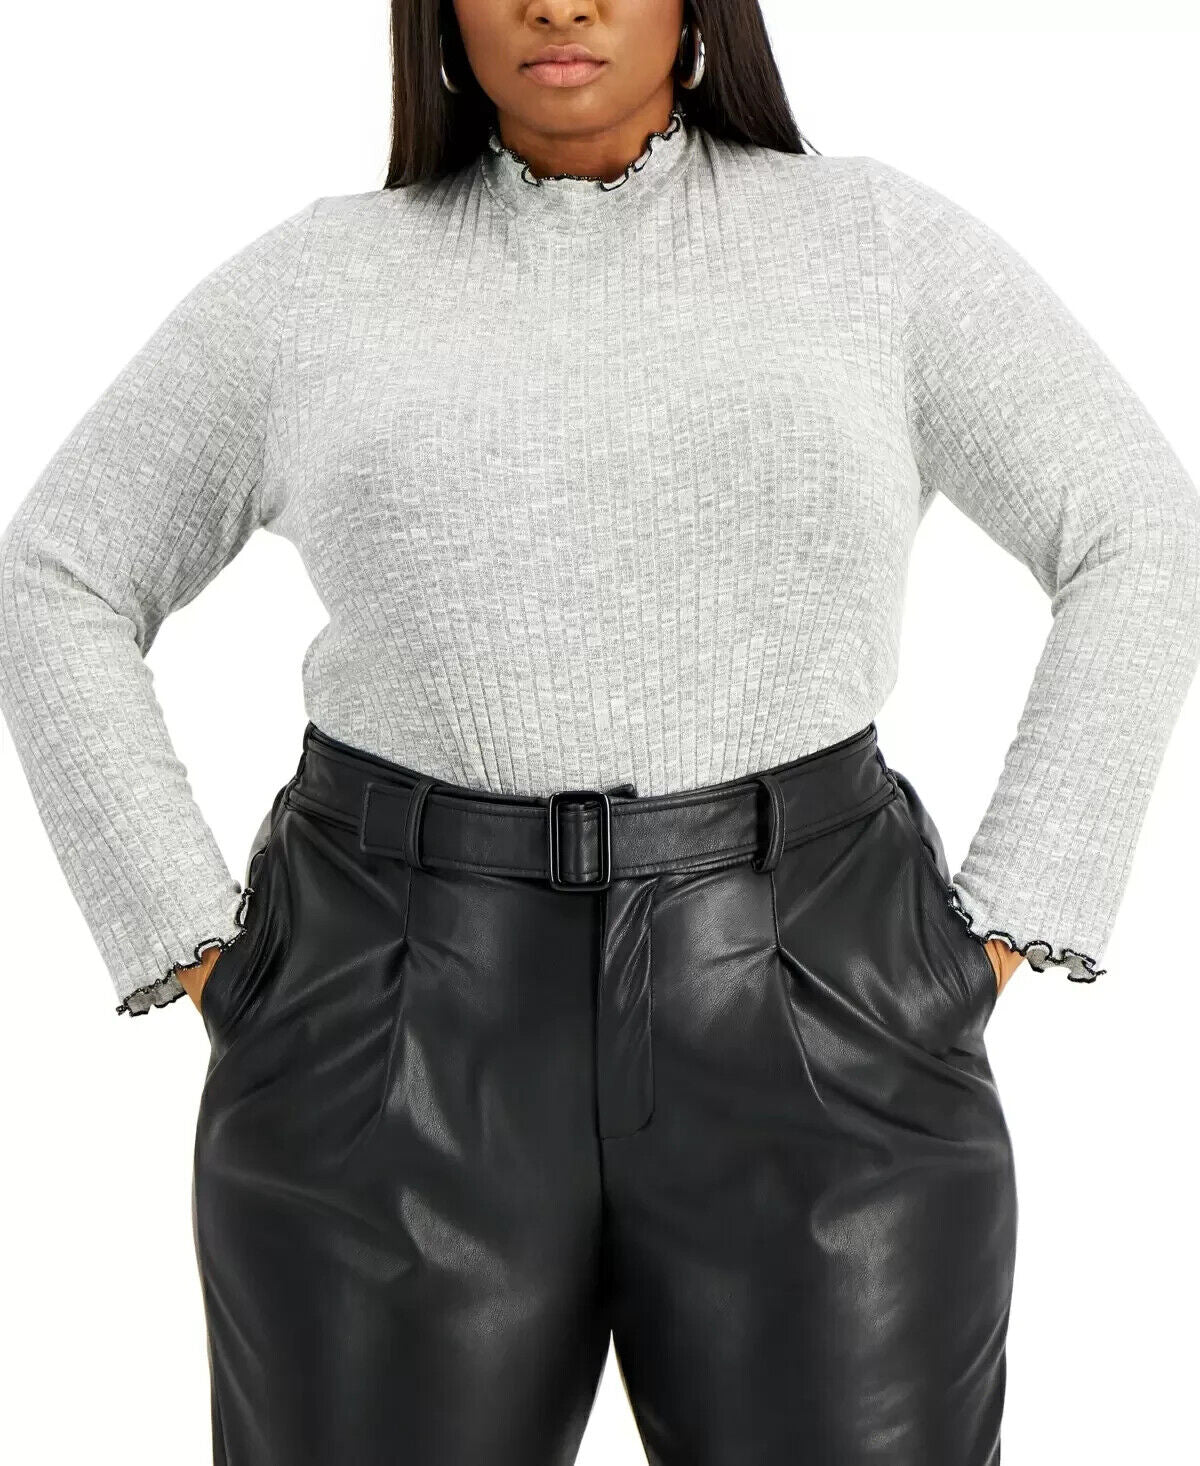 Rebellious One Plus Size Hacci Turtleneck Sweater MSRP $39 Size 2X # 4B 426 NEW